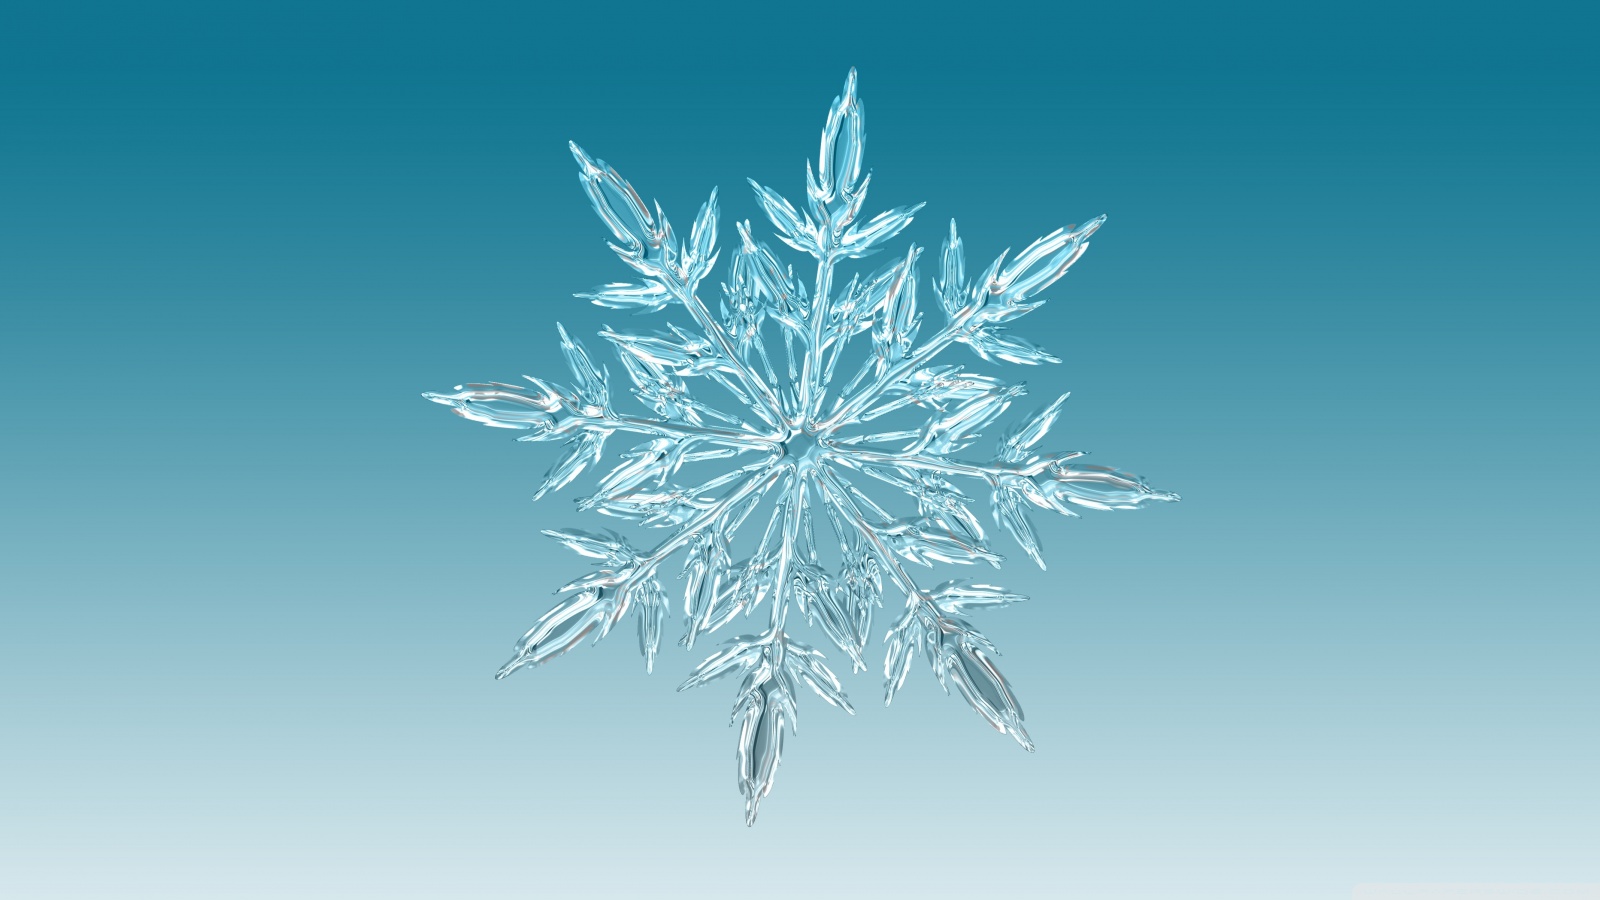 Snowflake Ice Crystal Hd Wallpaper Backgrounds Download